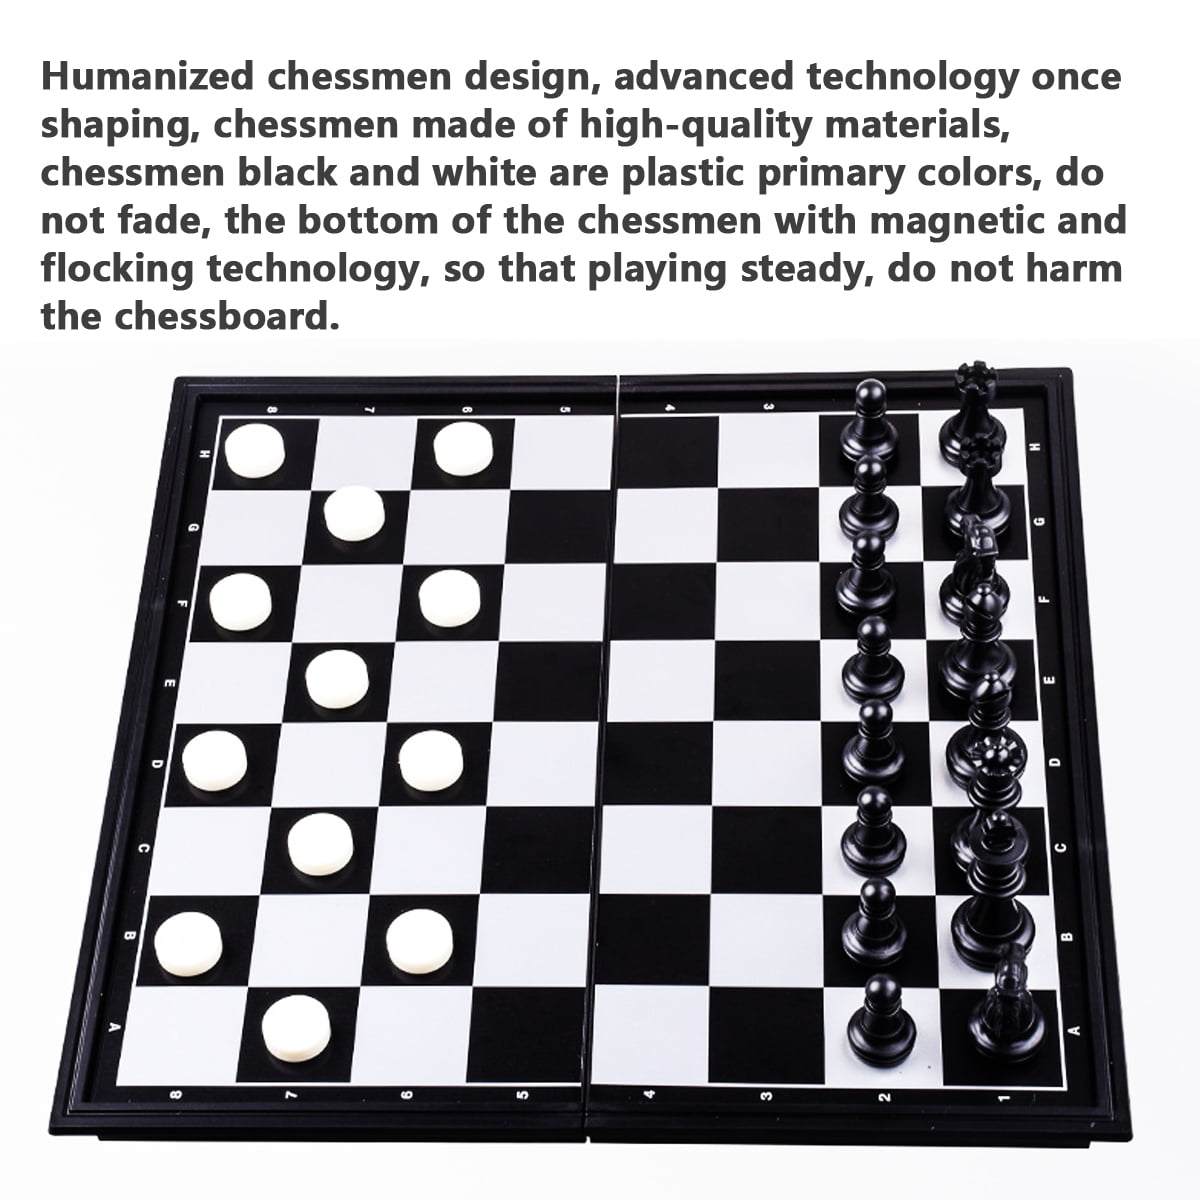 HJUIK Chess Game Set Portable Travel Games Chess & Checkers & Backgammon 3 in 1 Set Without Magnetic Board Size 34x34cm Kids Gift Wooden